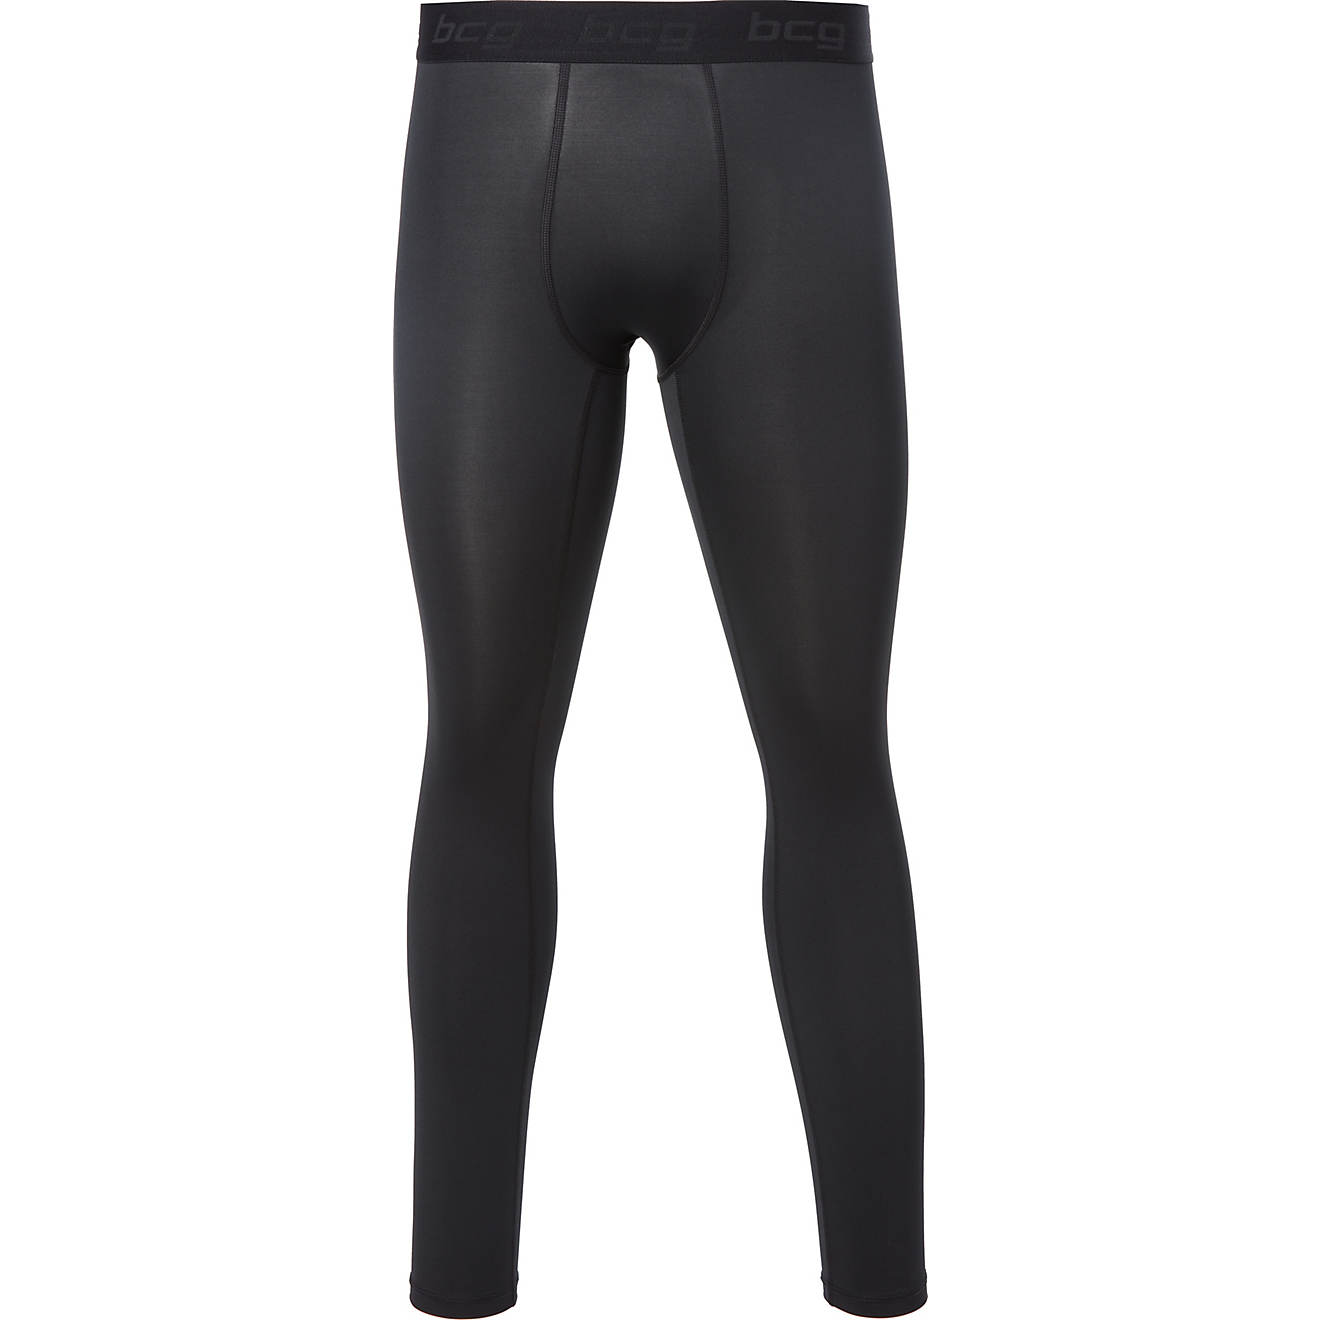 BCG Men's Performance Full Length Compression Tights